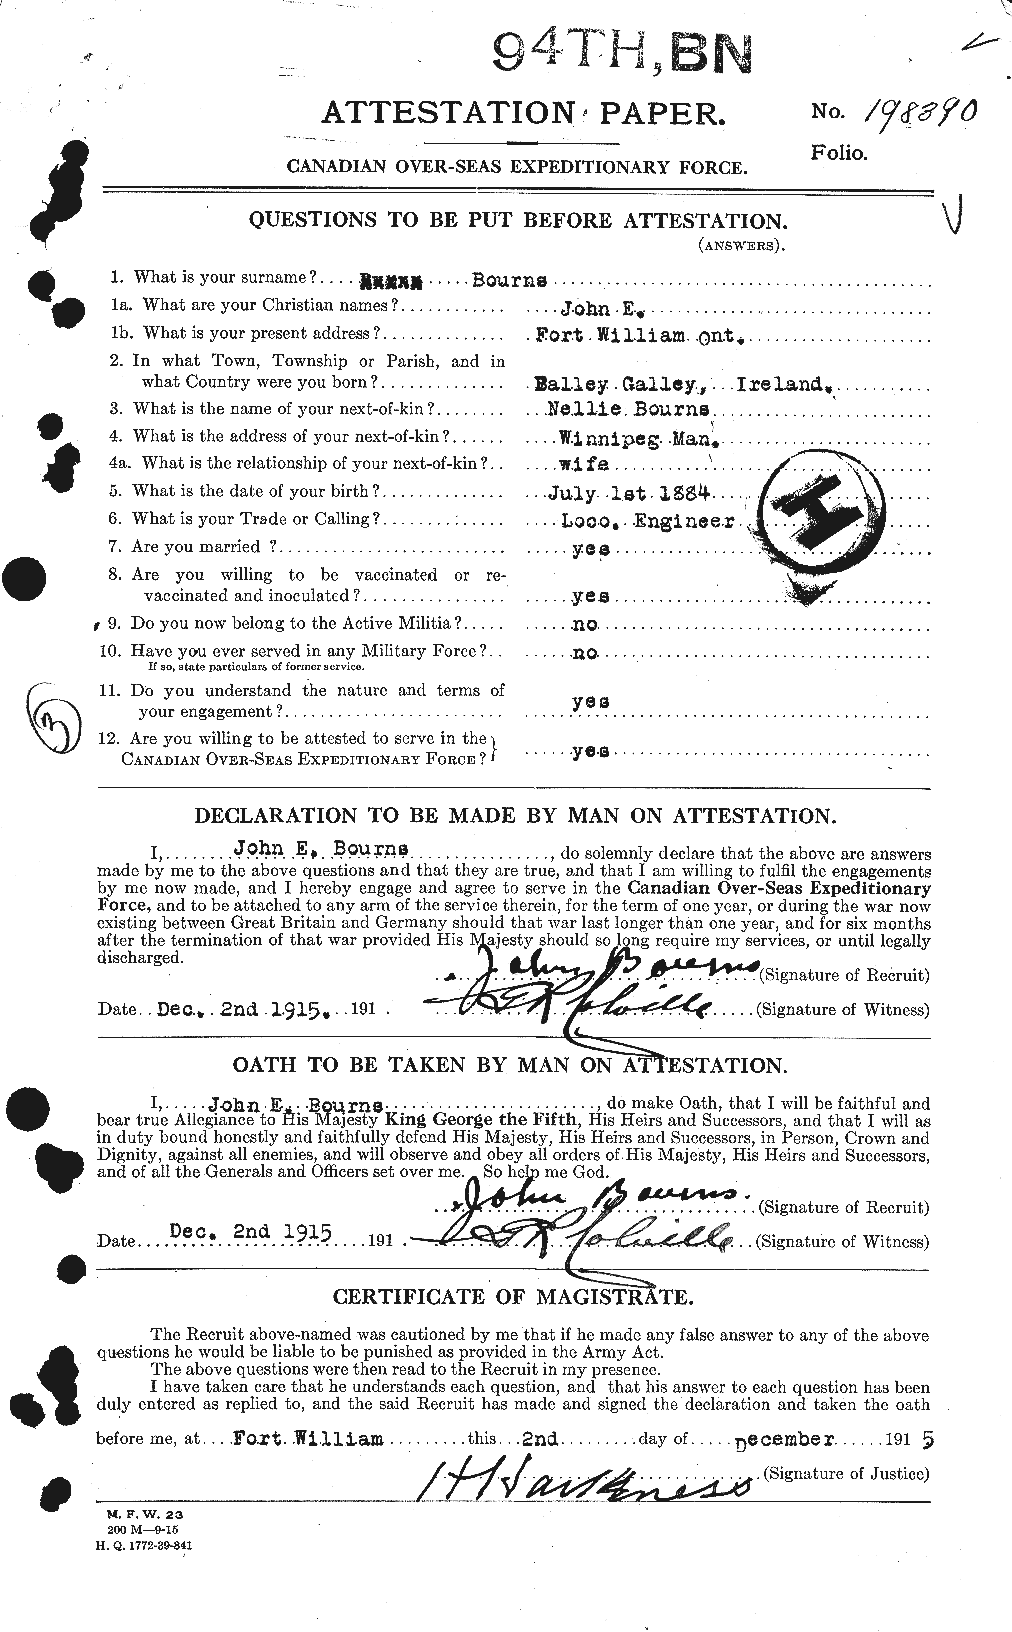 Personnel Records of the First World War - CEF 254174a